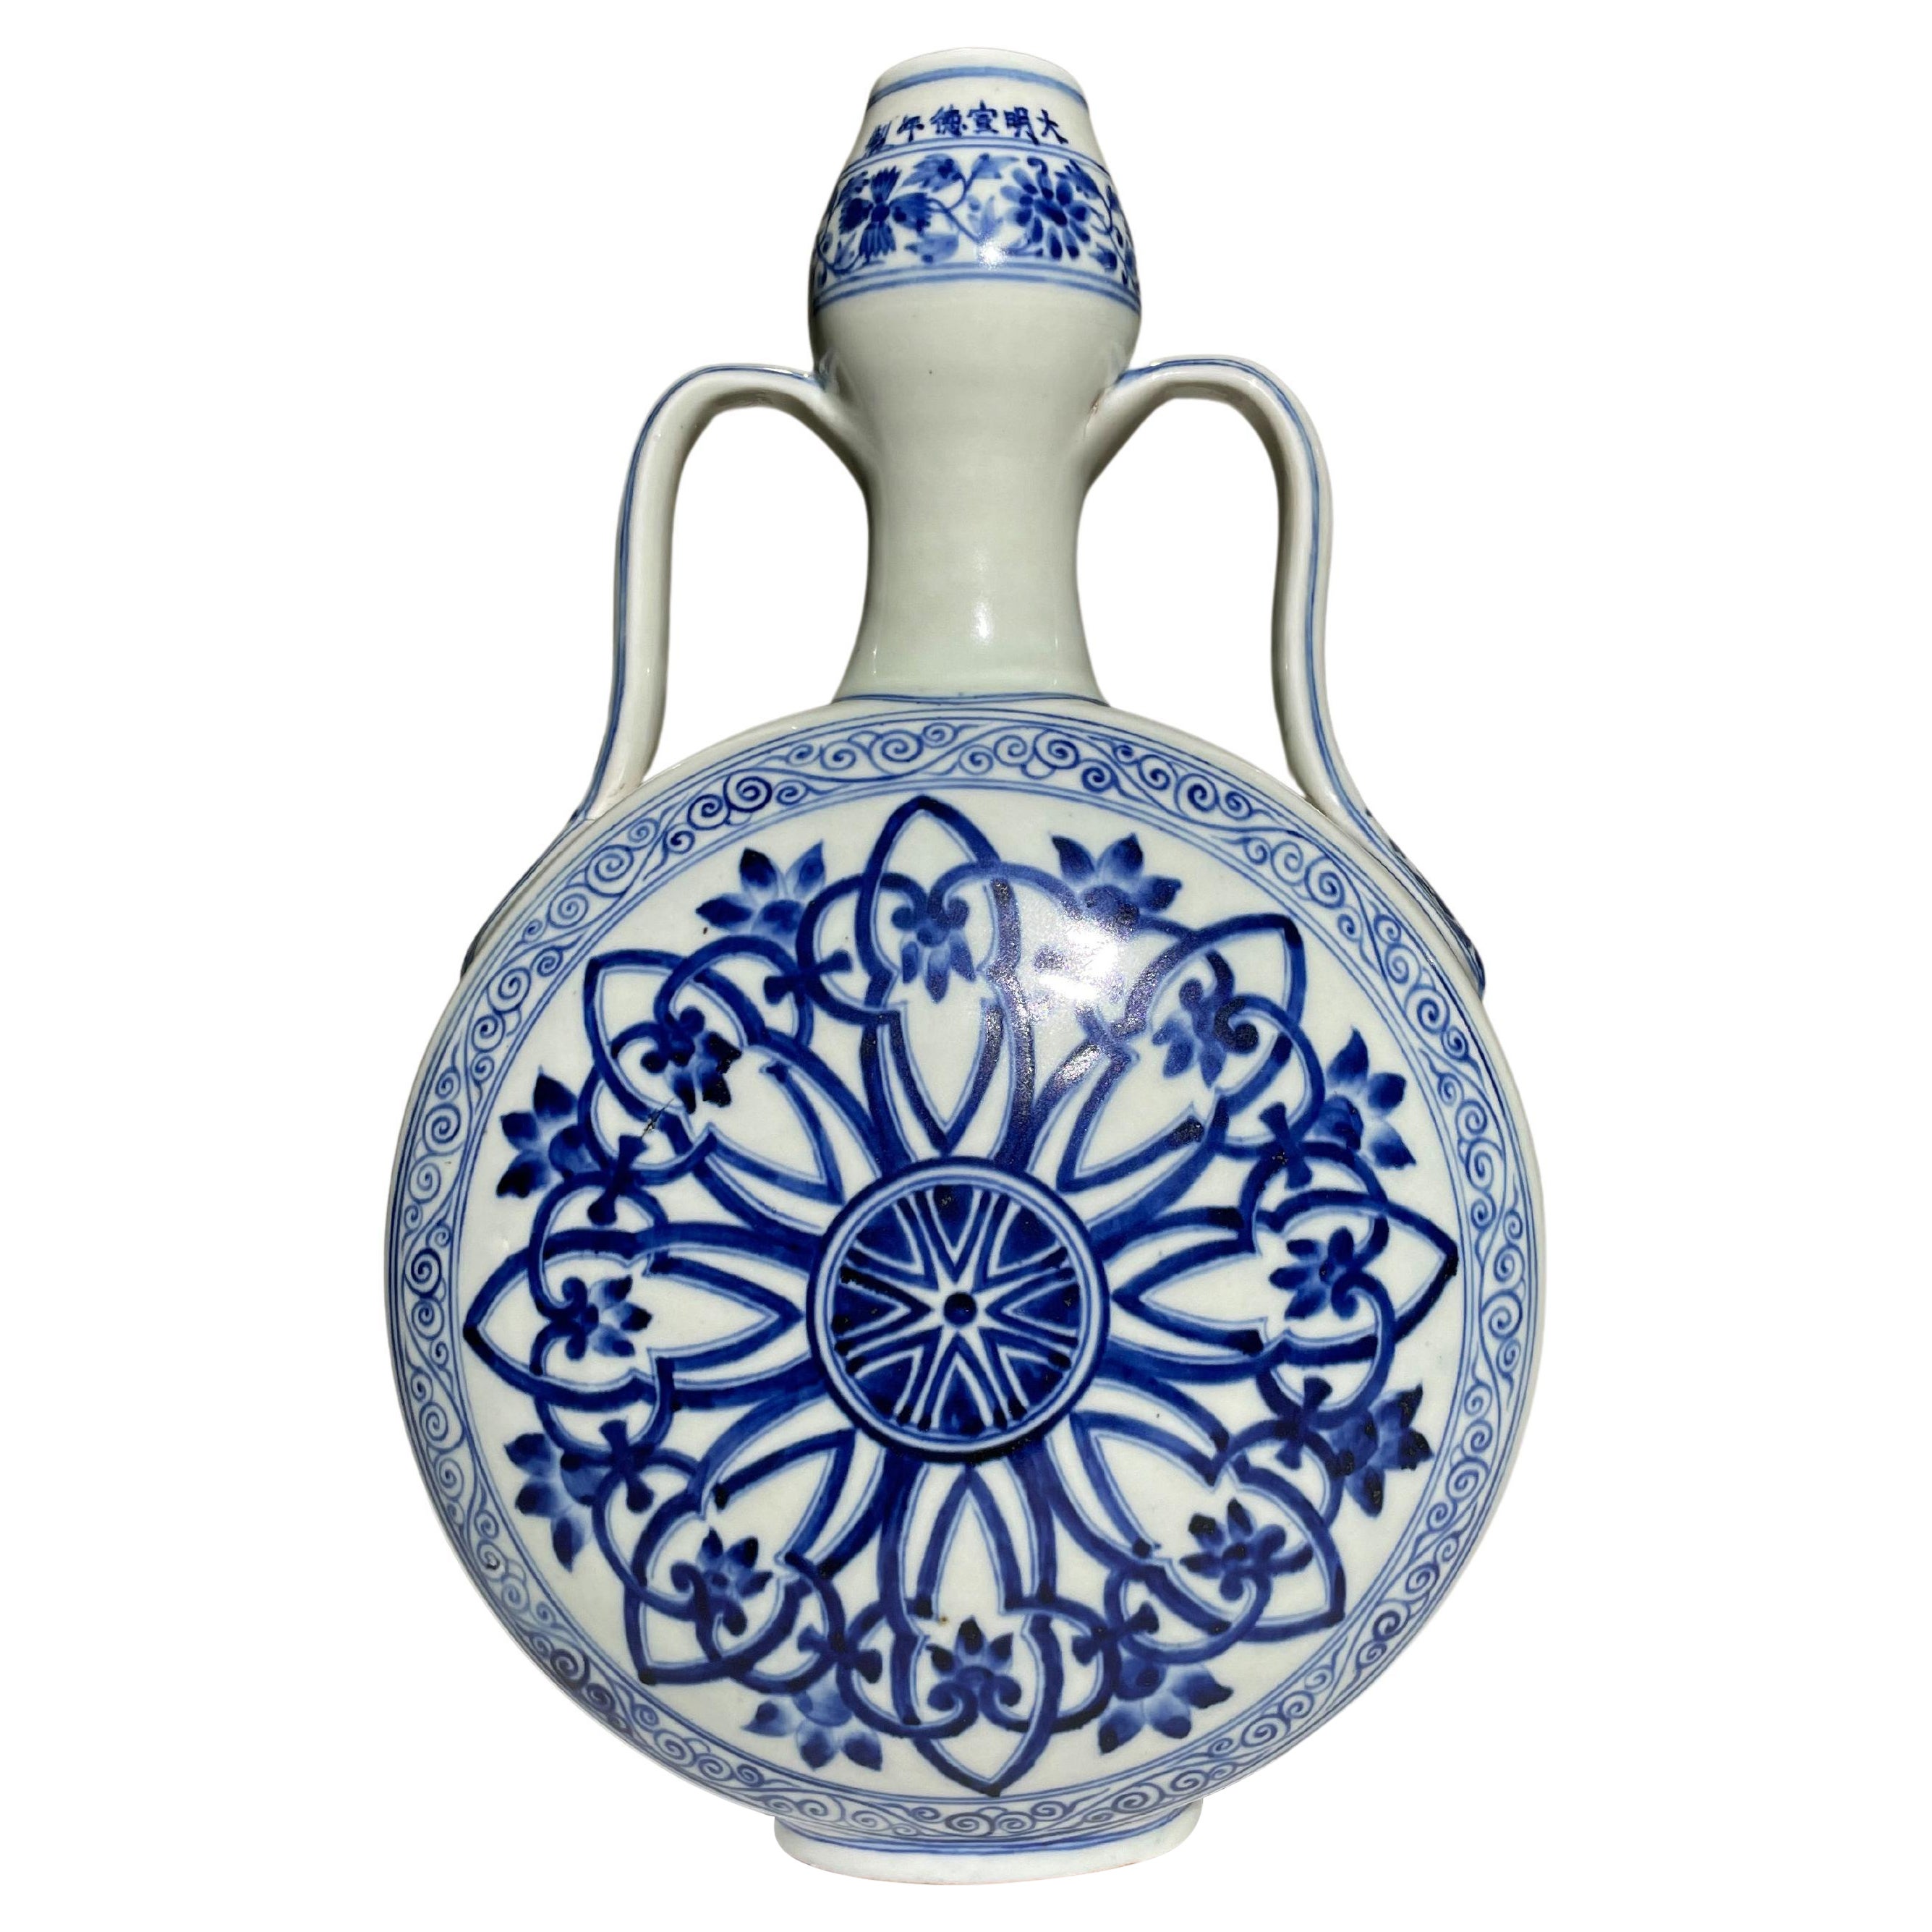 Chinese Antique Gourd-Shaped Blue and White Porcelain Vase, Ming Period